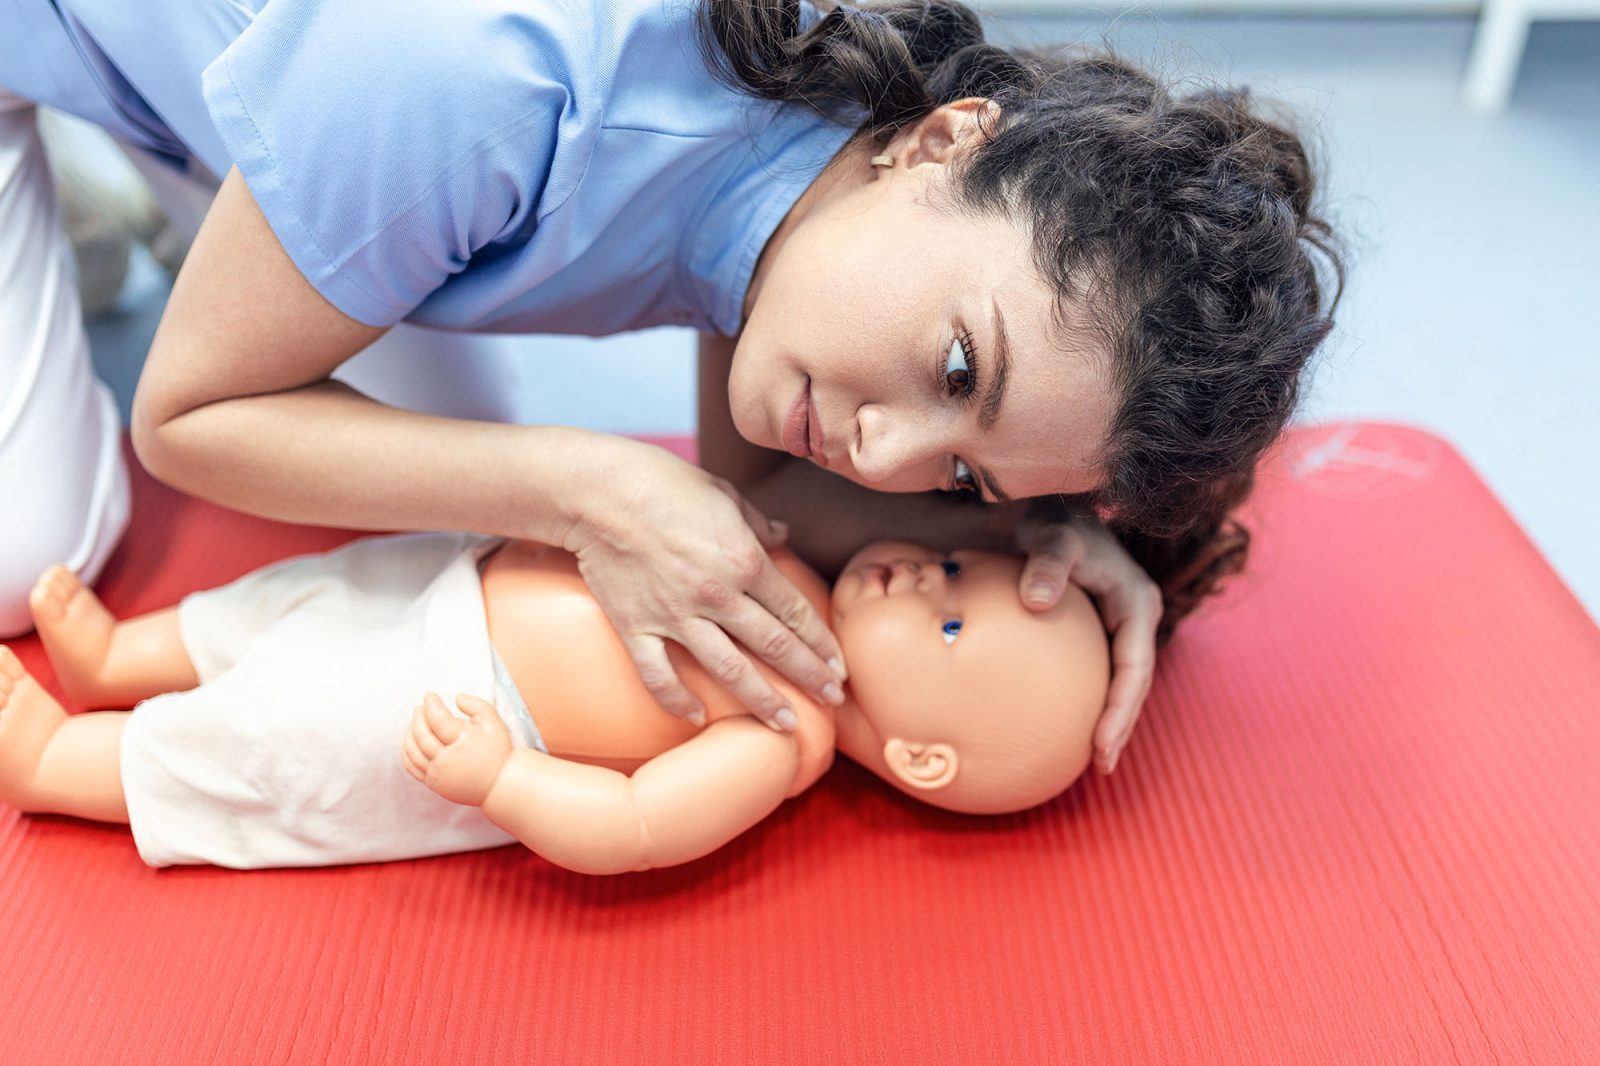 CPR practitioner examining airway passages on infant dummy. Model dummy lays on table and two doctors practice first aid.